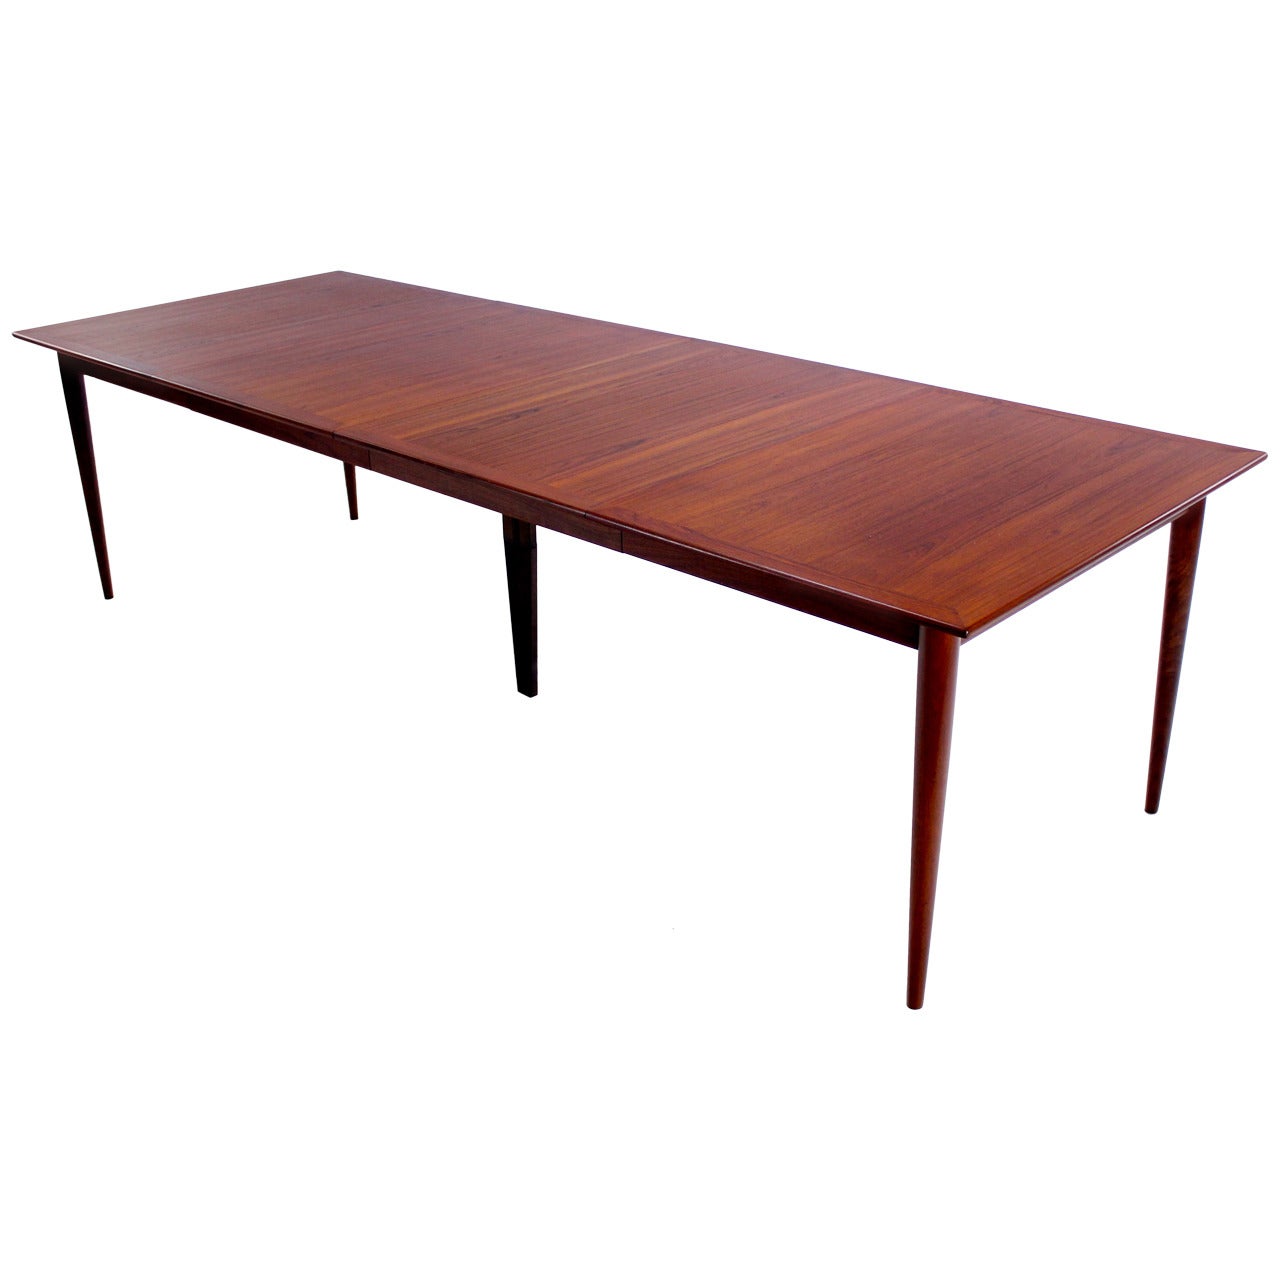 Extremely Rare Danish Modern Teak Dining Table Designed by Grete Jalk For Sale